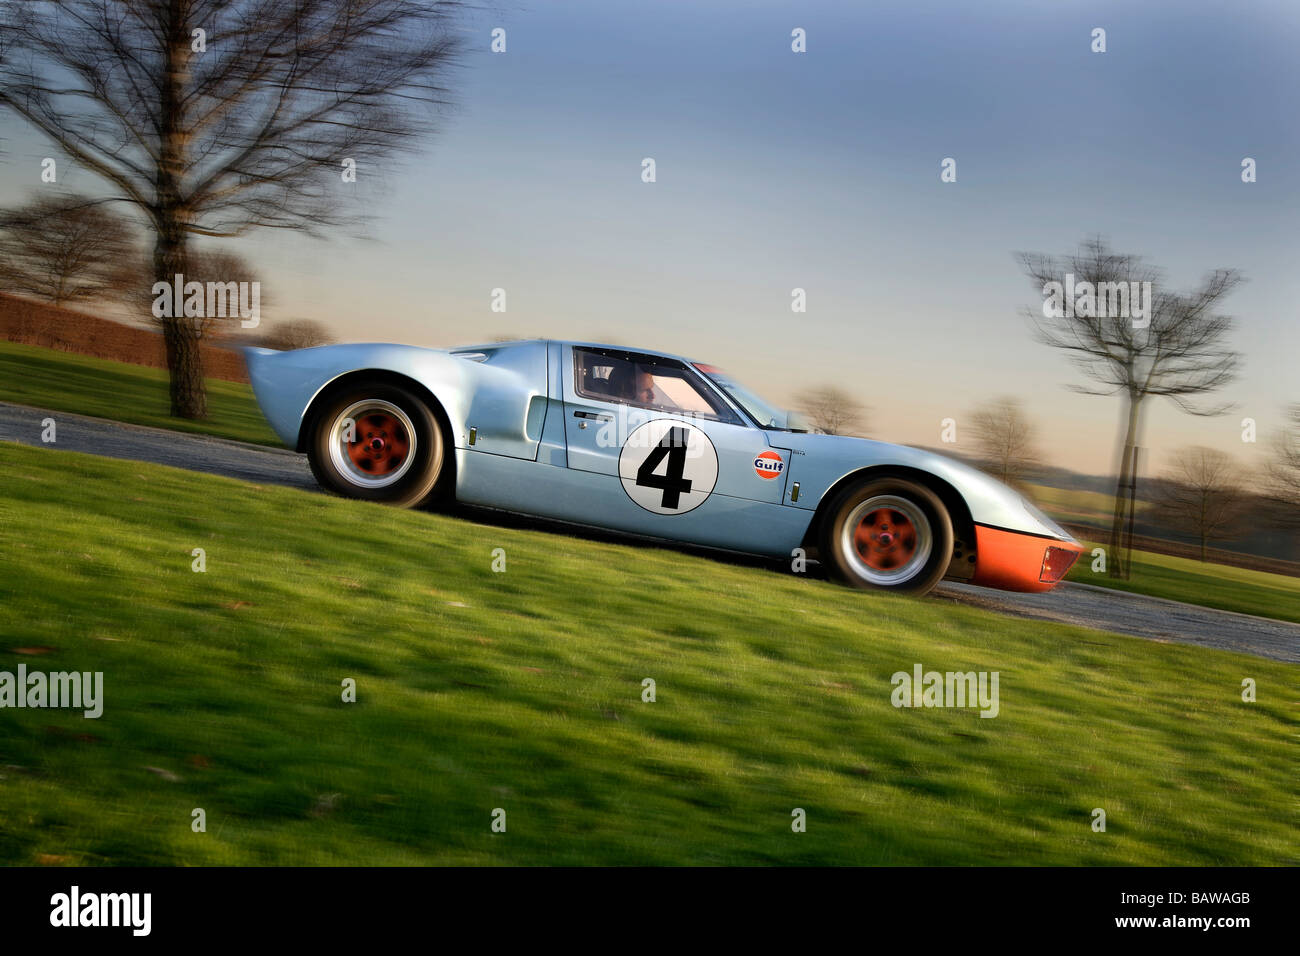 Ford gt40 in panning profile.blue and orange livery with the number 4 decals Stock Photo